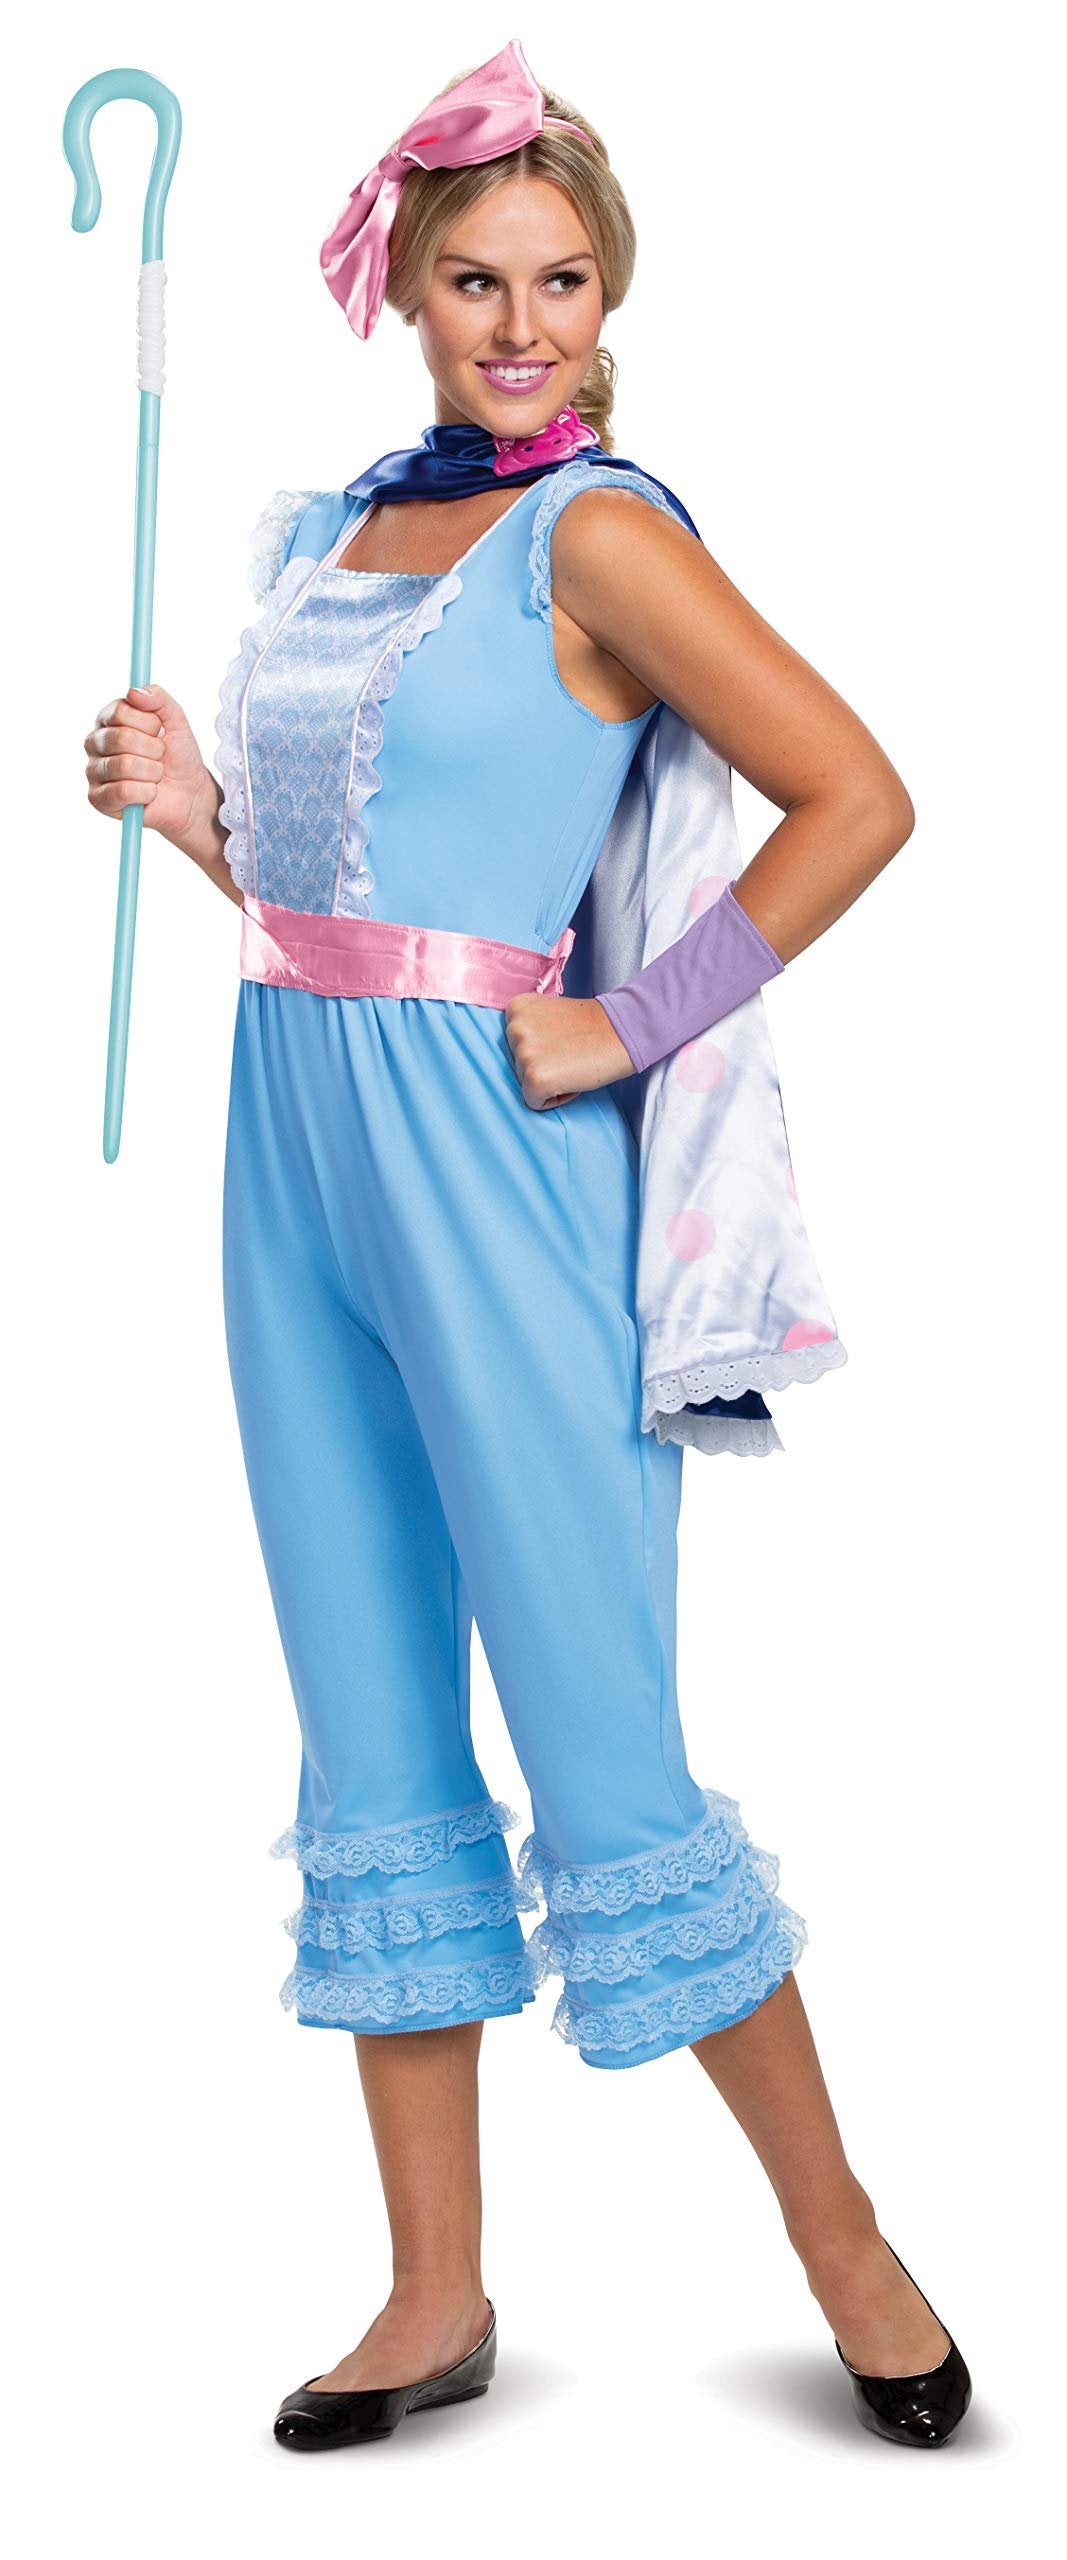 Authentic Disguise Toy Story 4 Bo Peep Deluxe Costume - Women's Blue Size M (8-10)